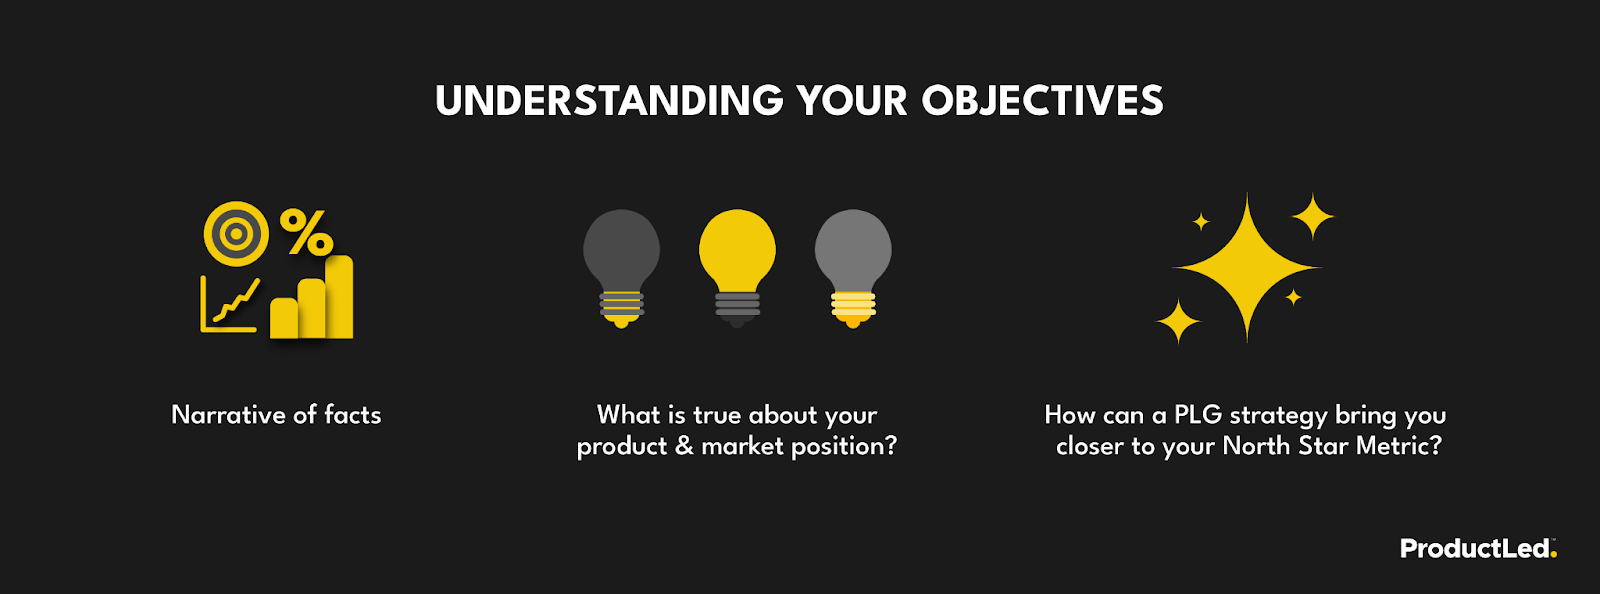 Understanding your company's objectives